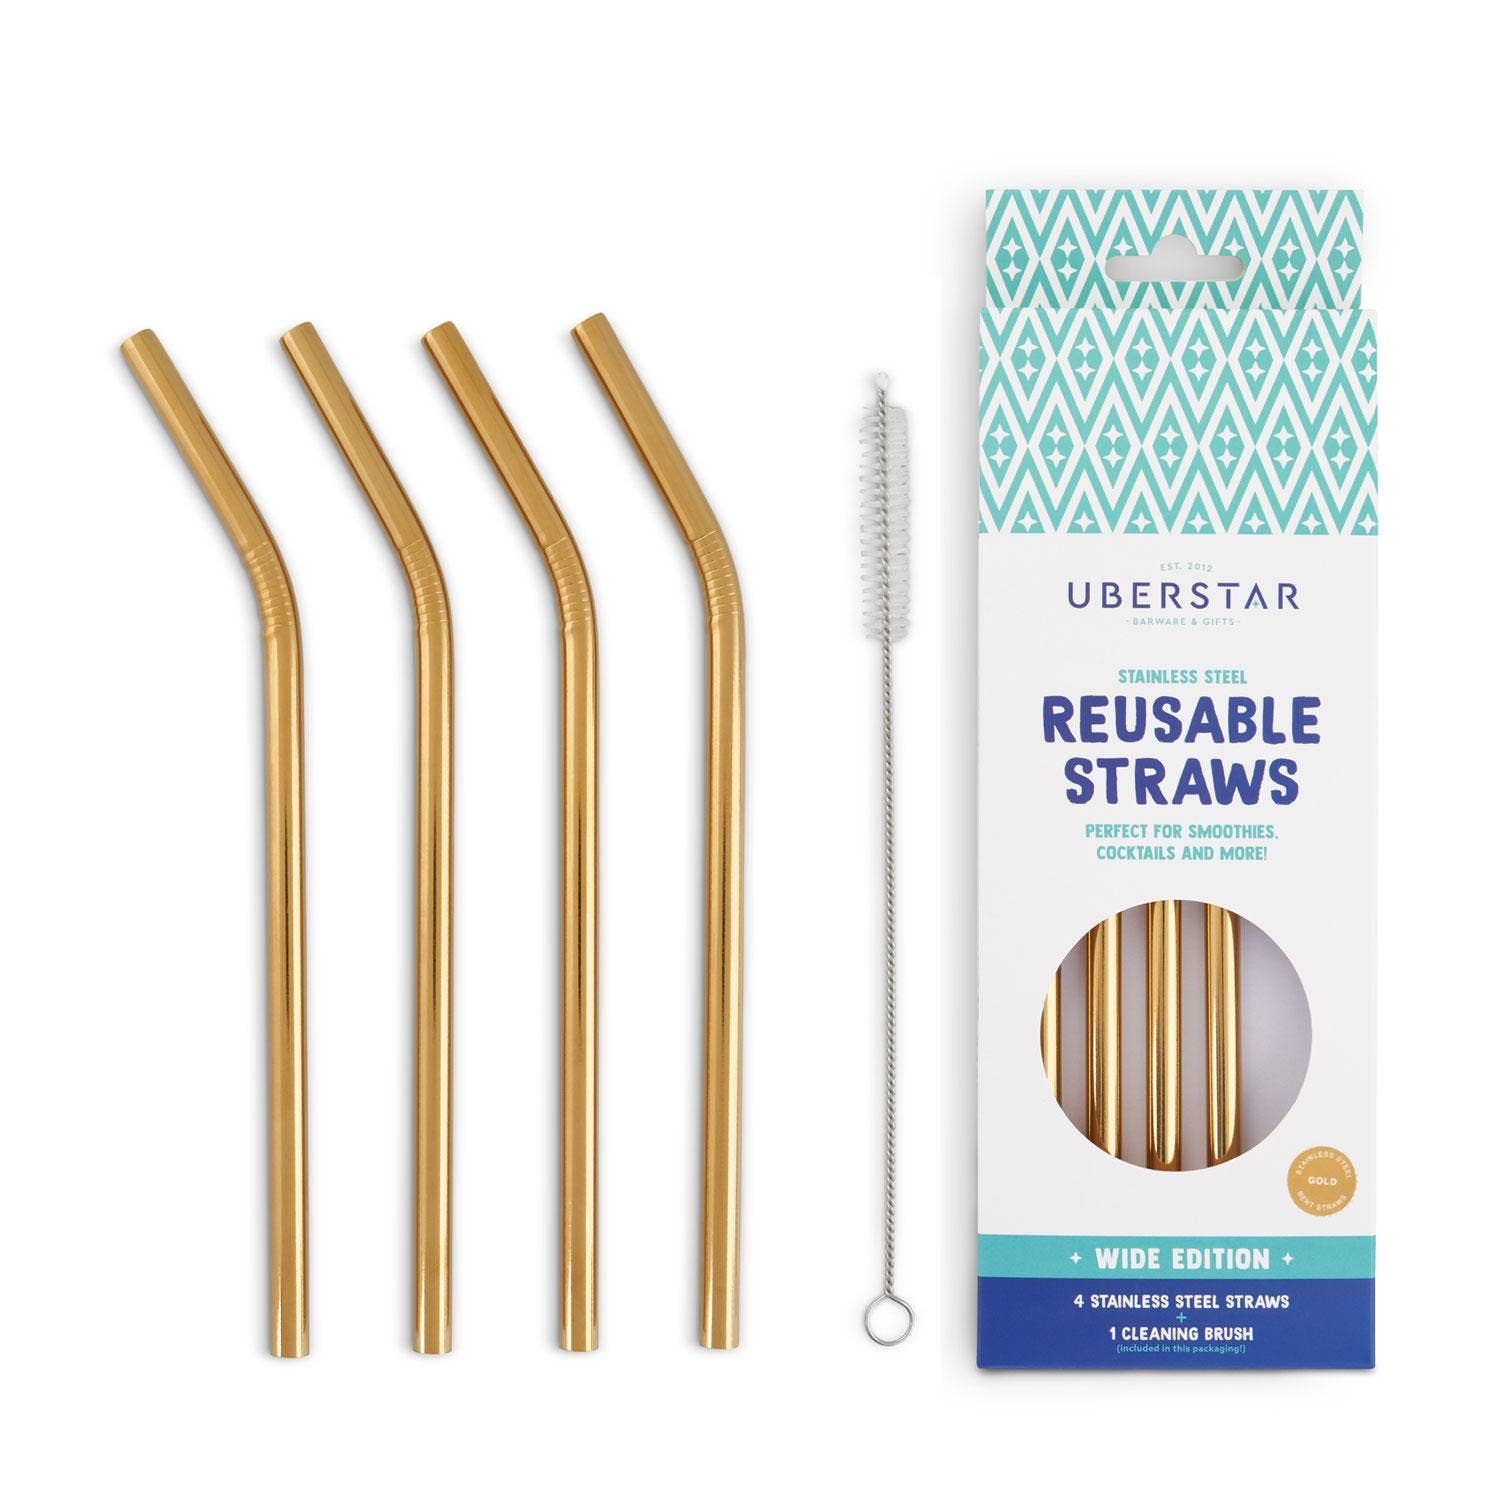 Reusable Gold Stainless Steel Metal Straws by UBERSTAR. Reusable gold metal straws. Metal straw for smoothies. Metal straws for cocktails